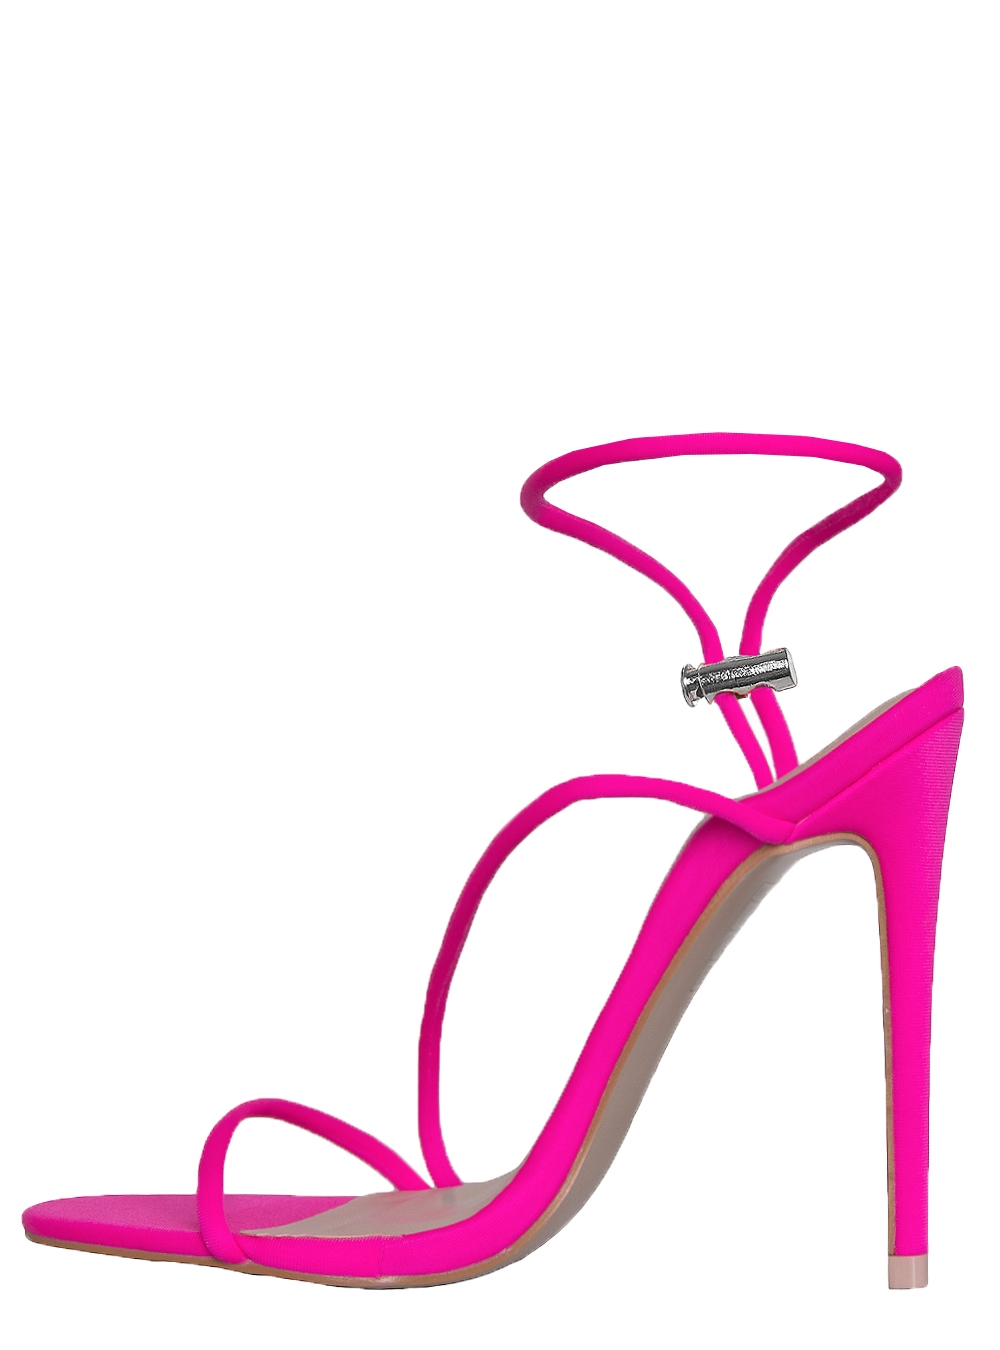 Cherry Neon Pink Strappy Toggle Heels